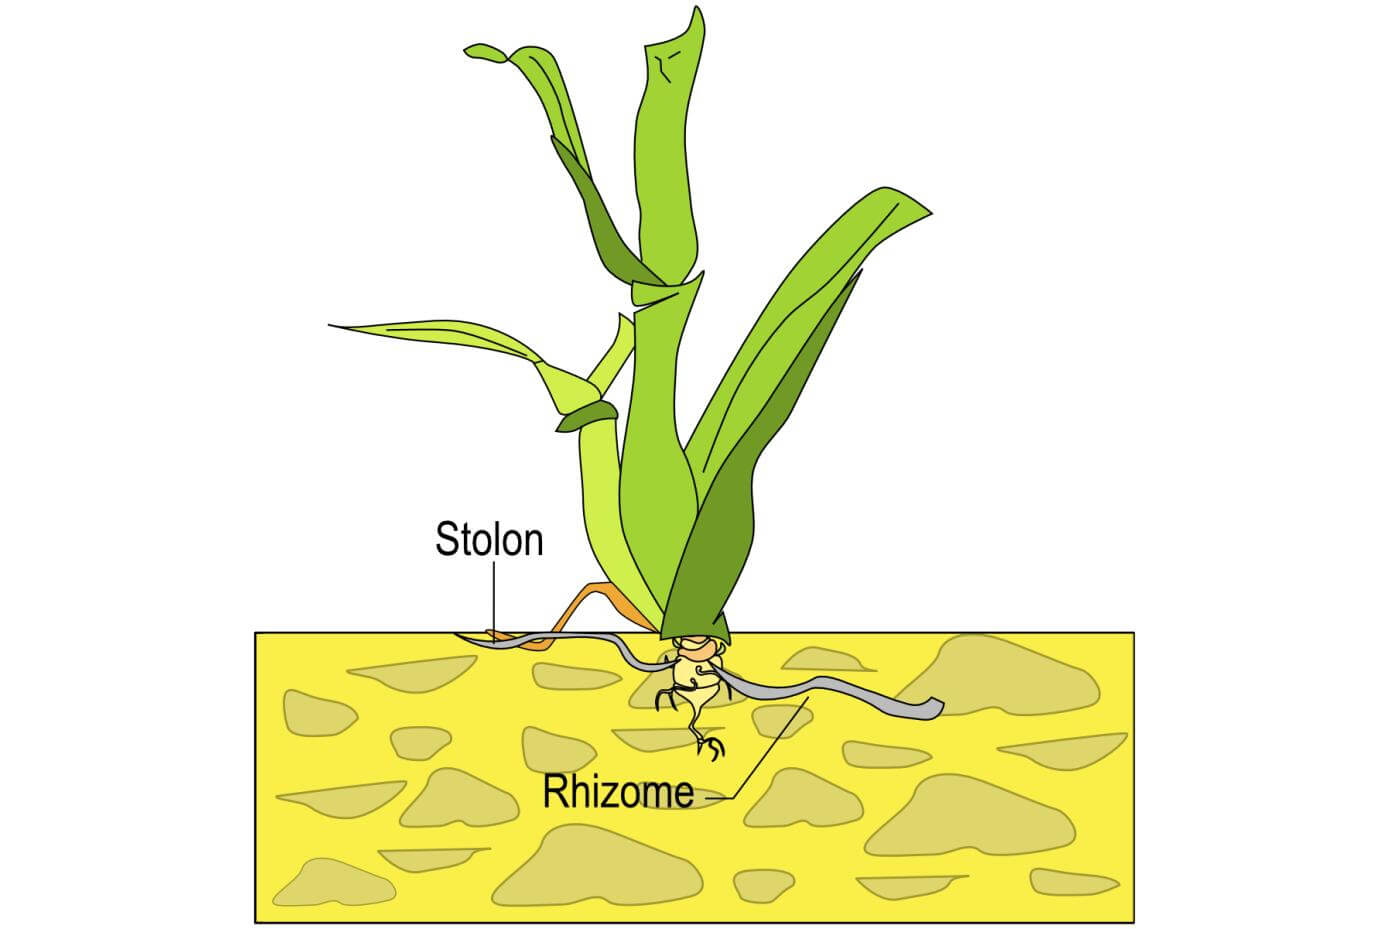 Illustration showing a rhizome and stolon growing from the base of a grass plant.